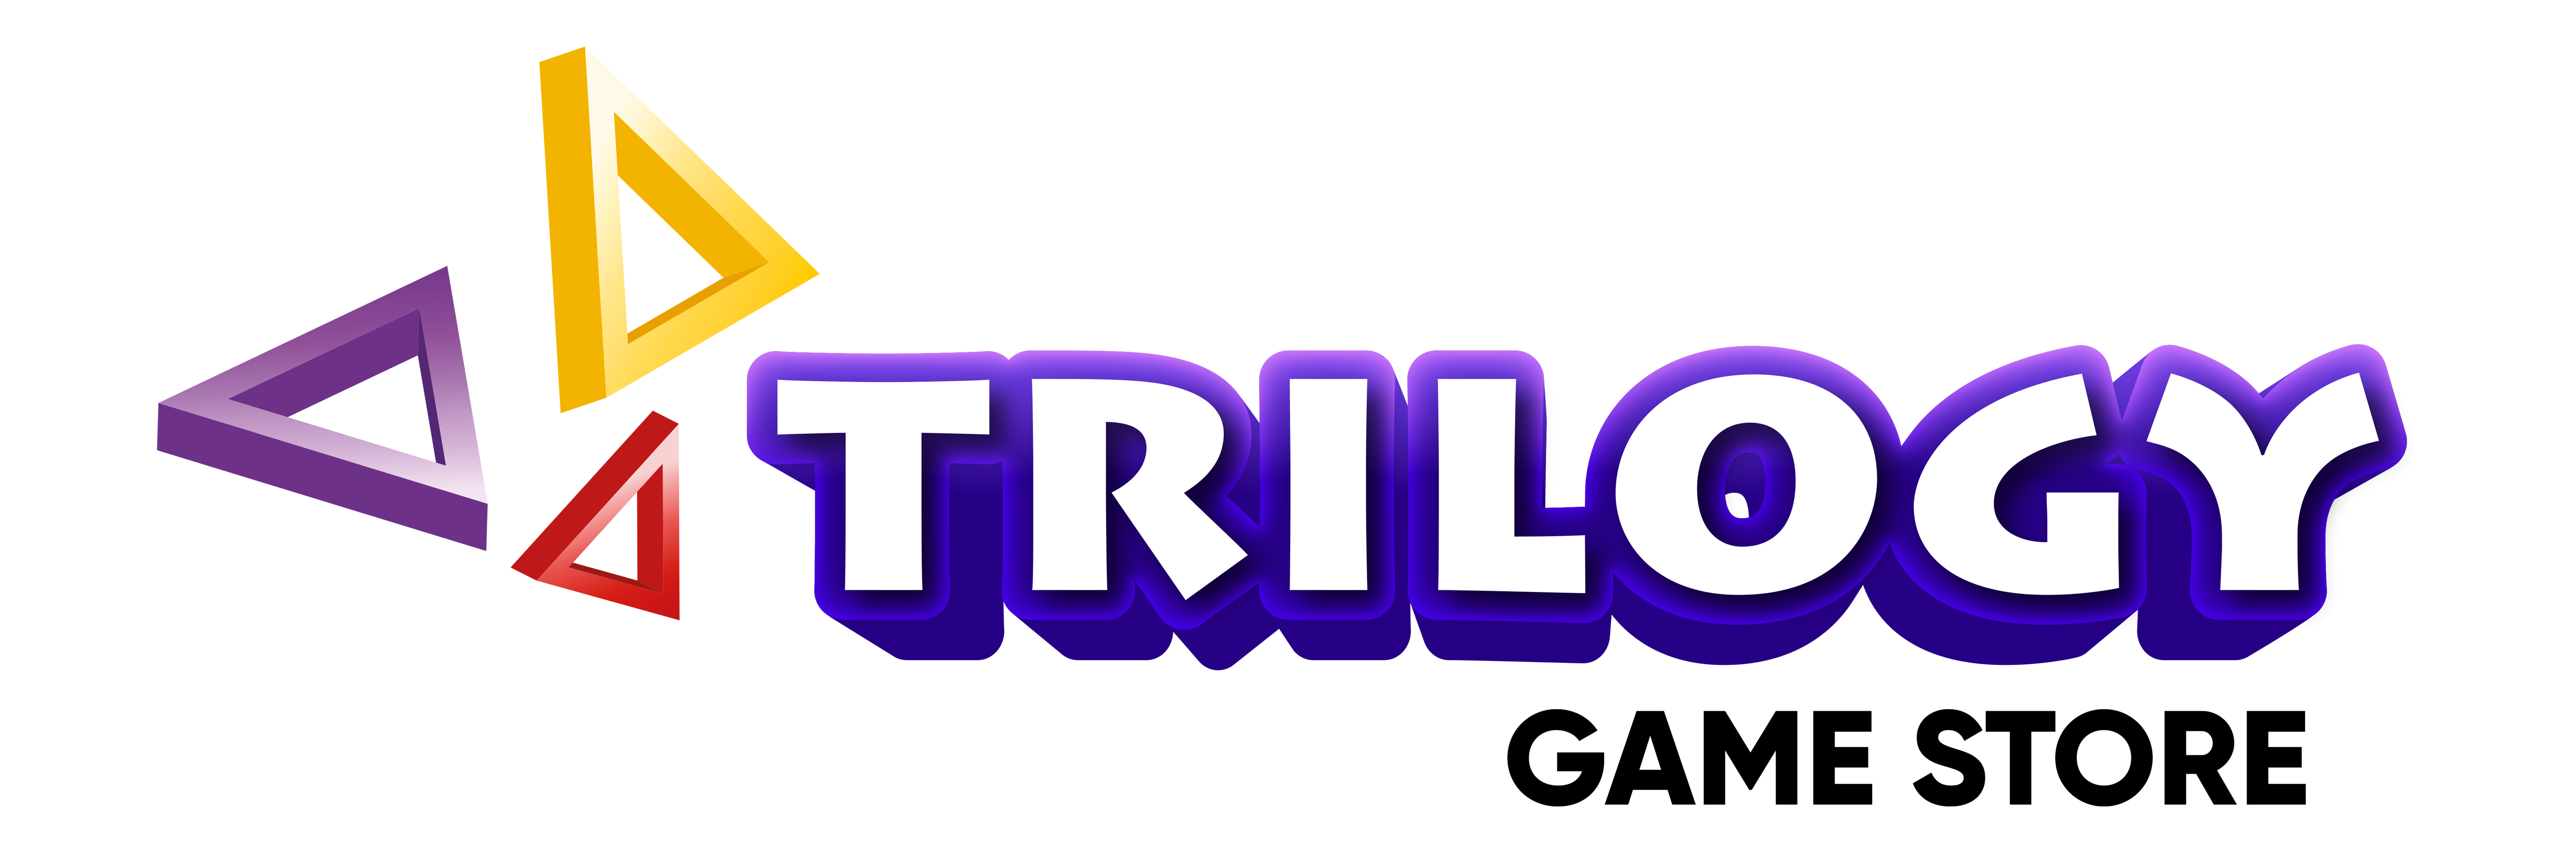 Trilogy Game Store